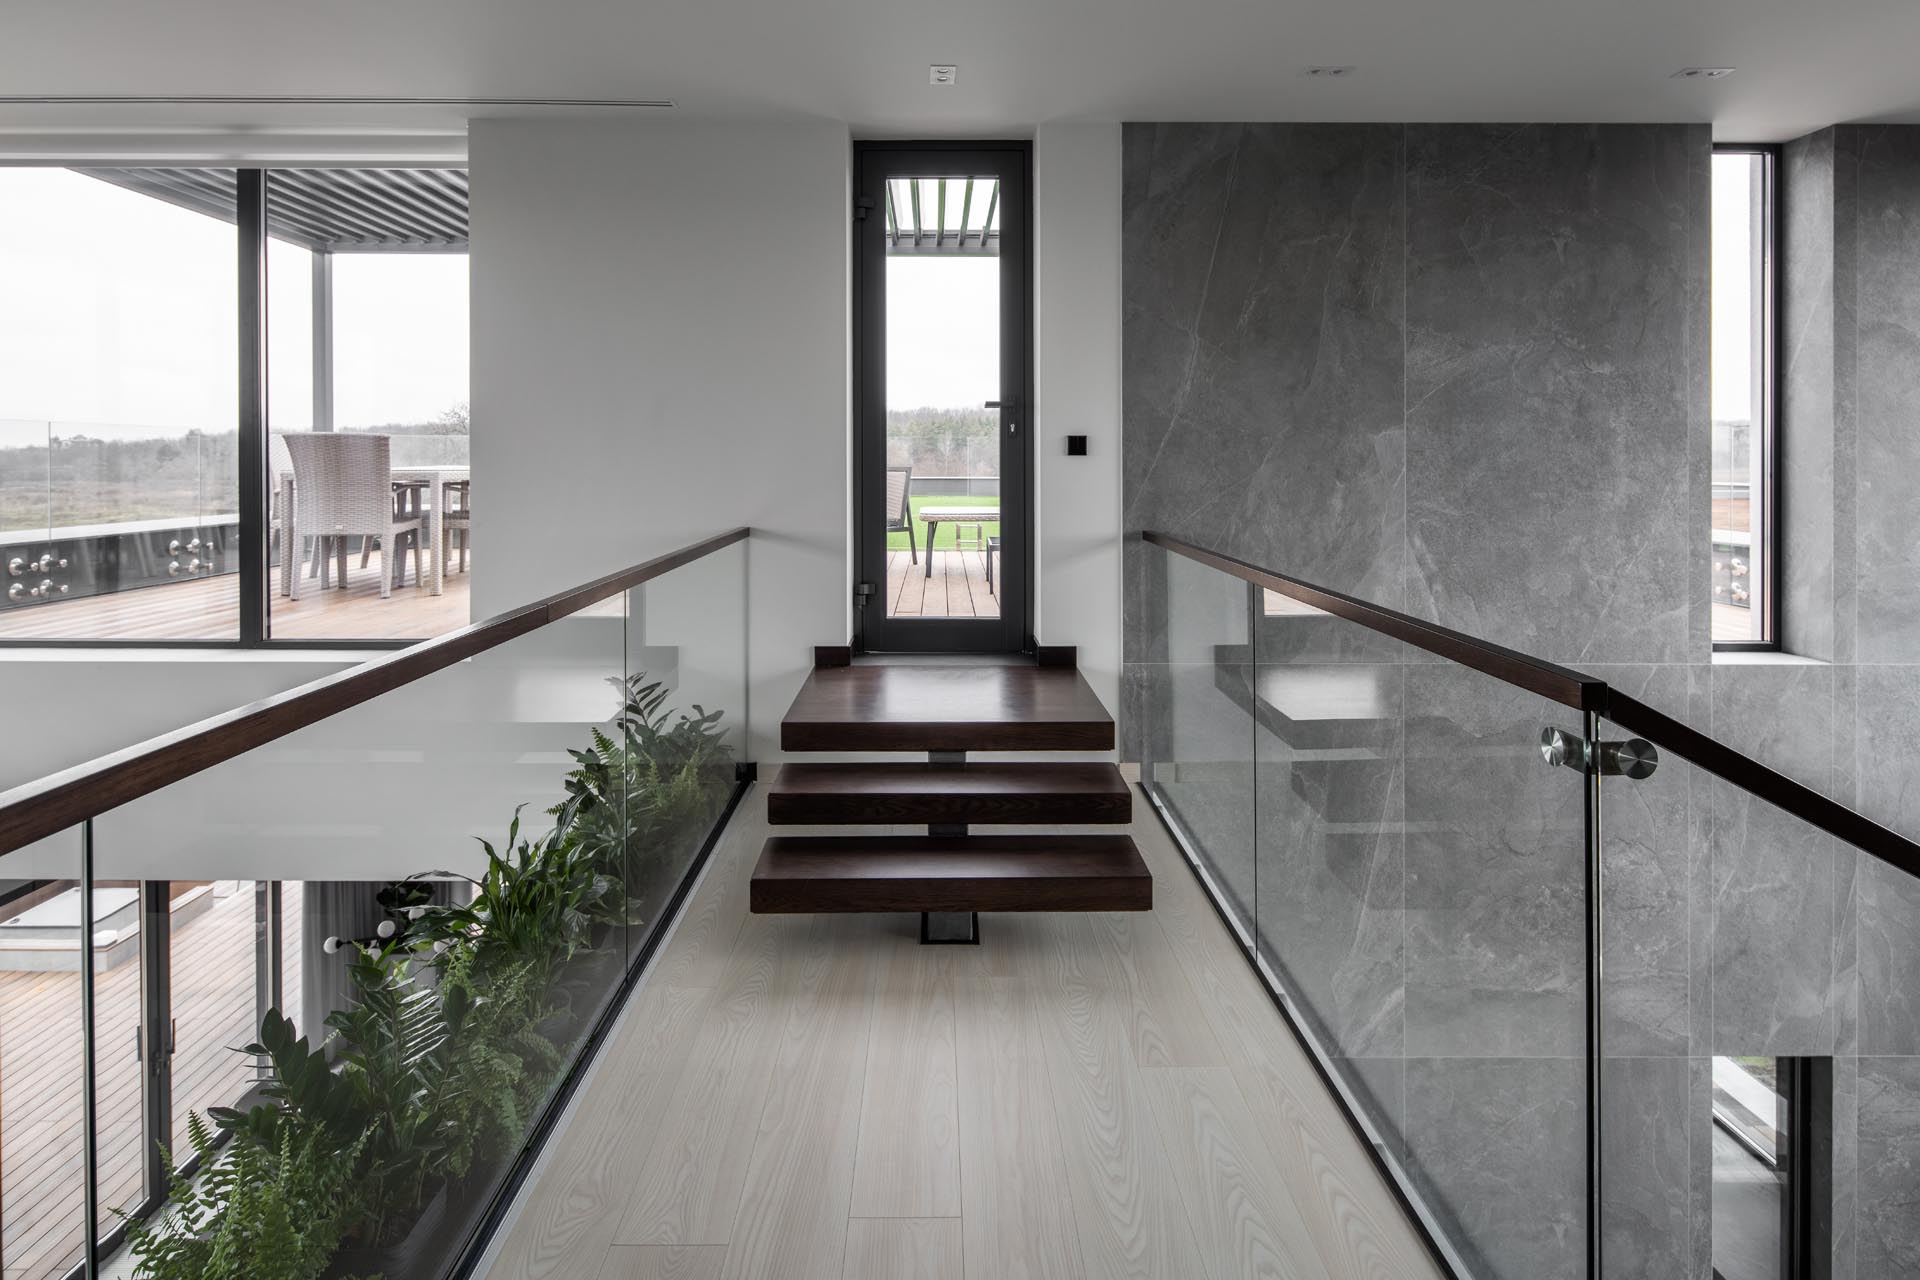 An open walkway with built-in planters and glass railings.